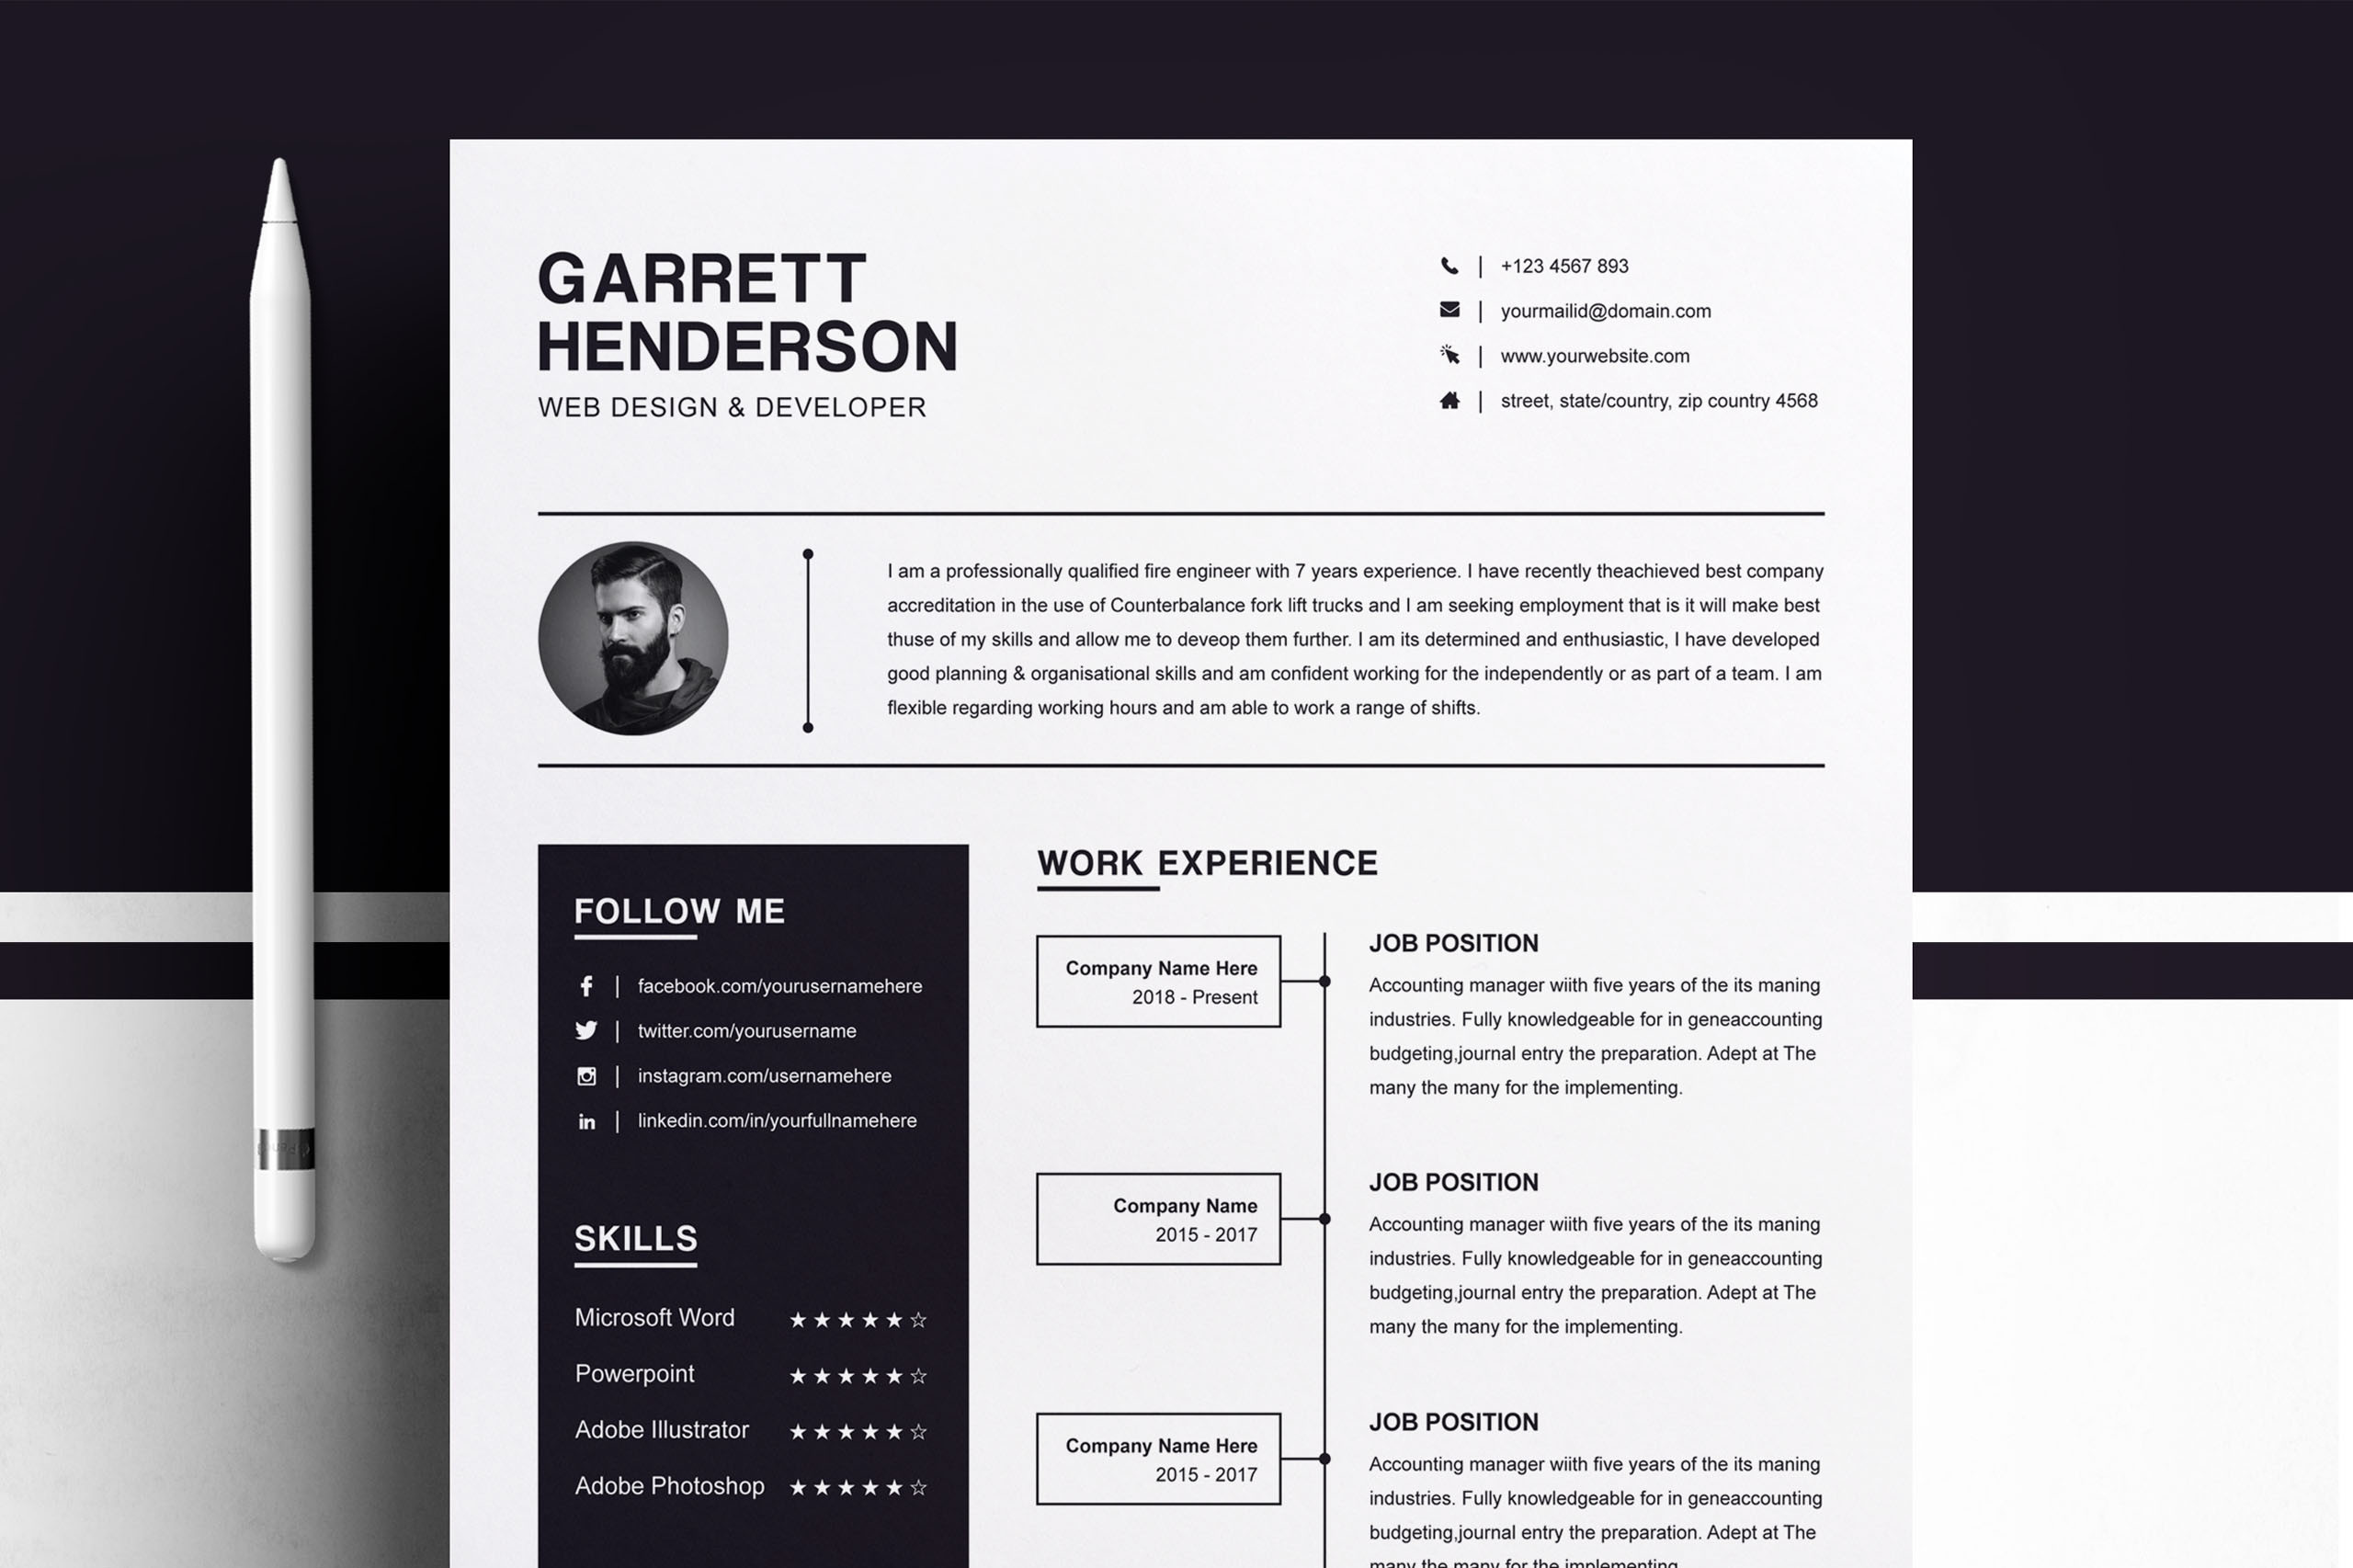 Samples Of Professional Resumes and Cover Letters One Page Resume Template   Cover Letter